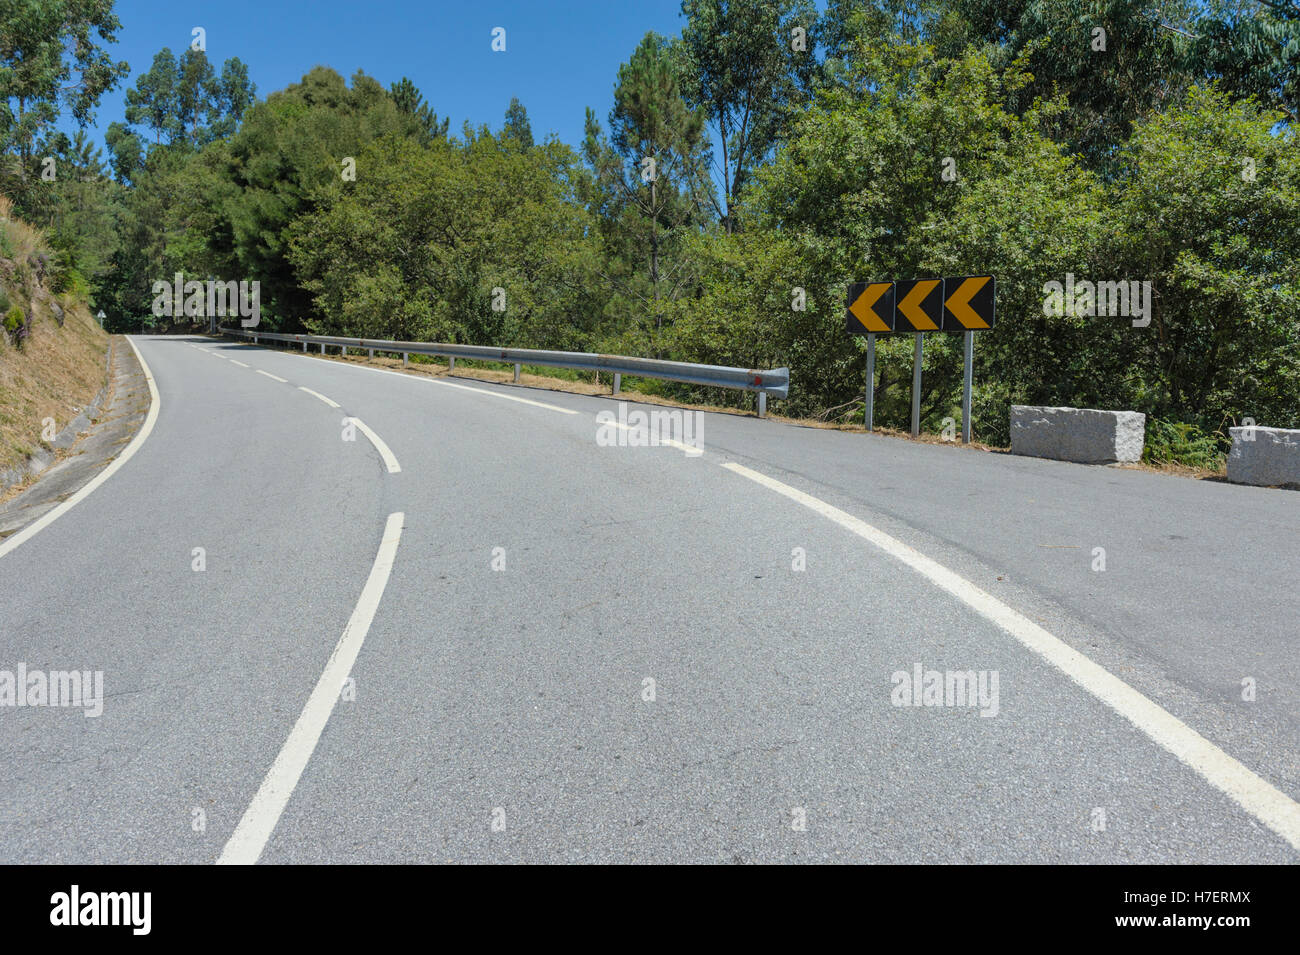 A bend in a rural road with signpost and white lines Stock Photo